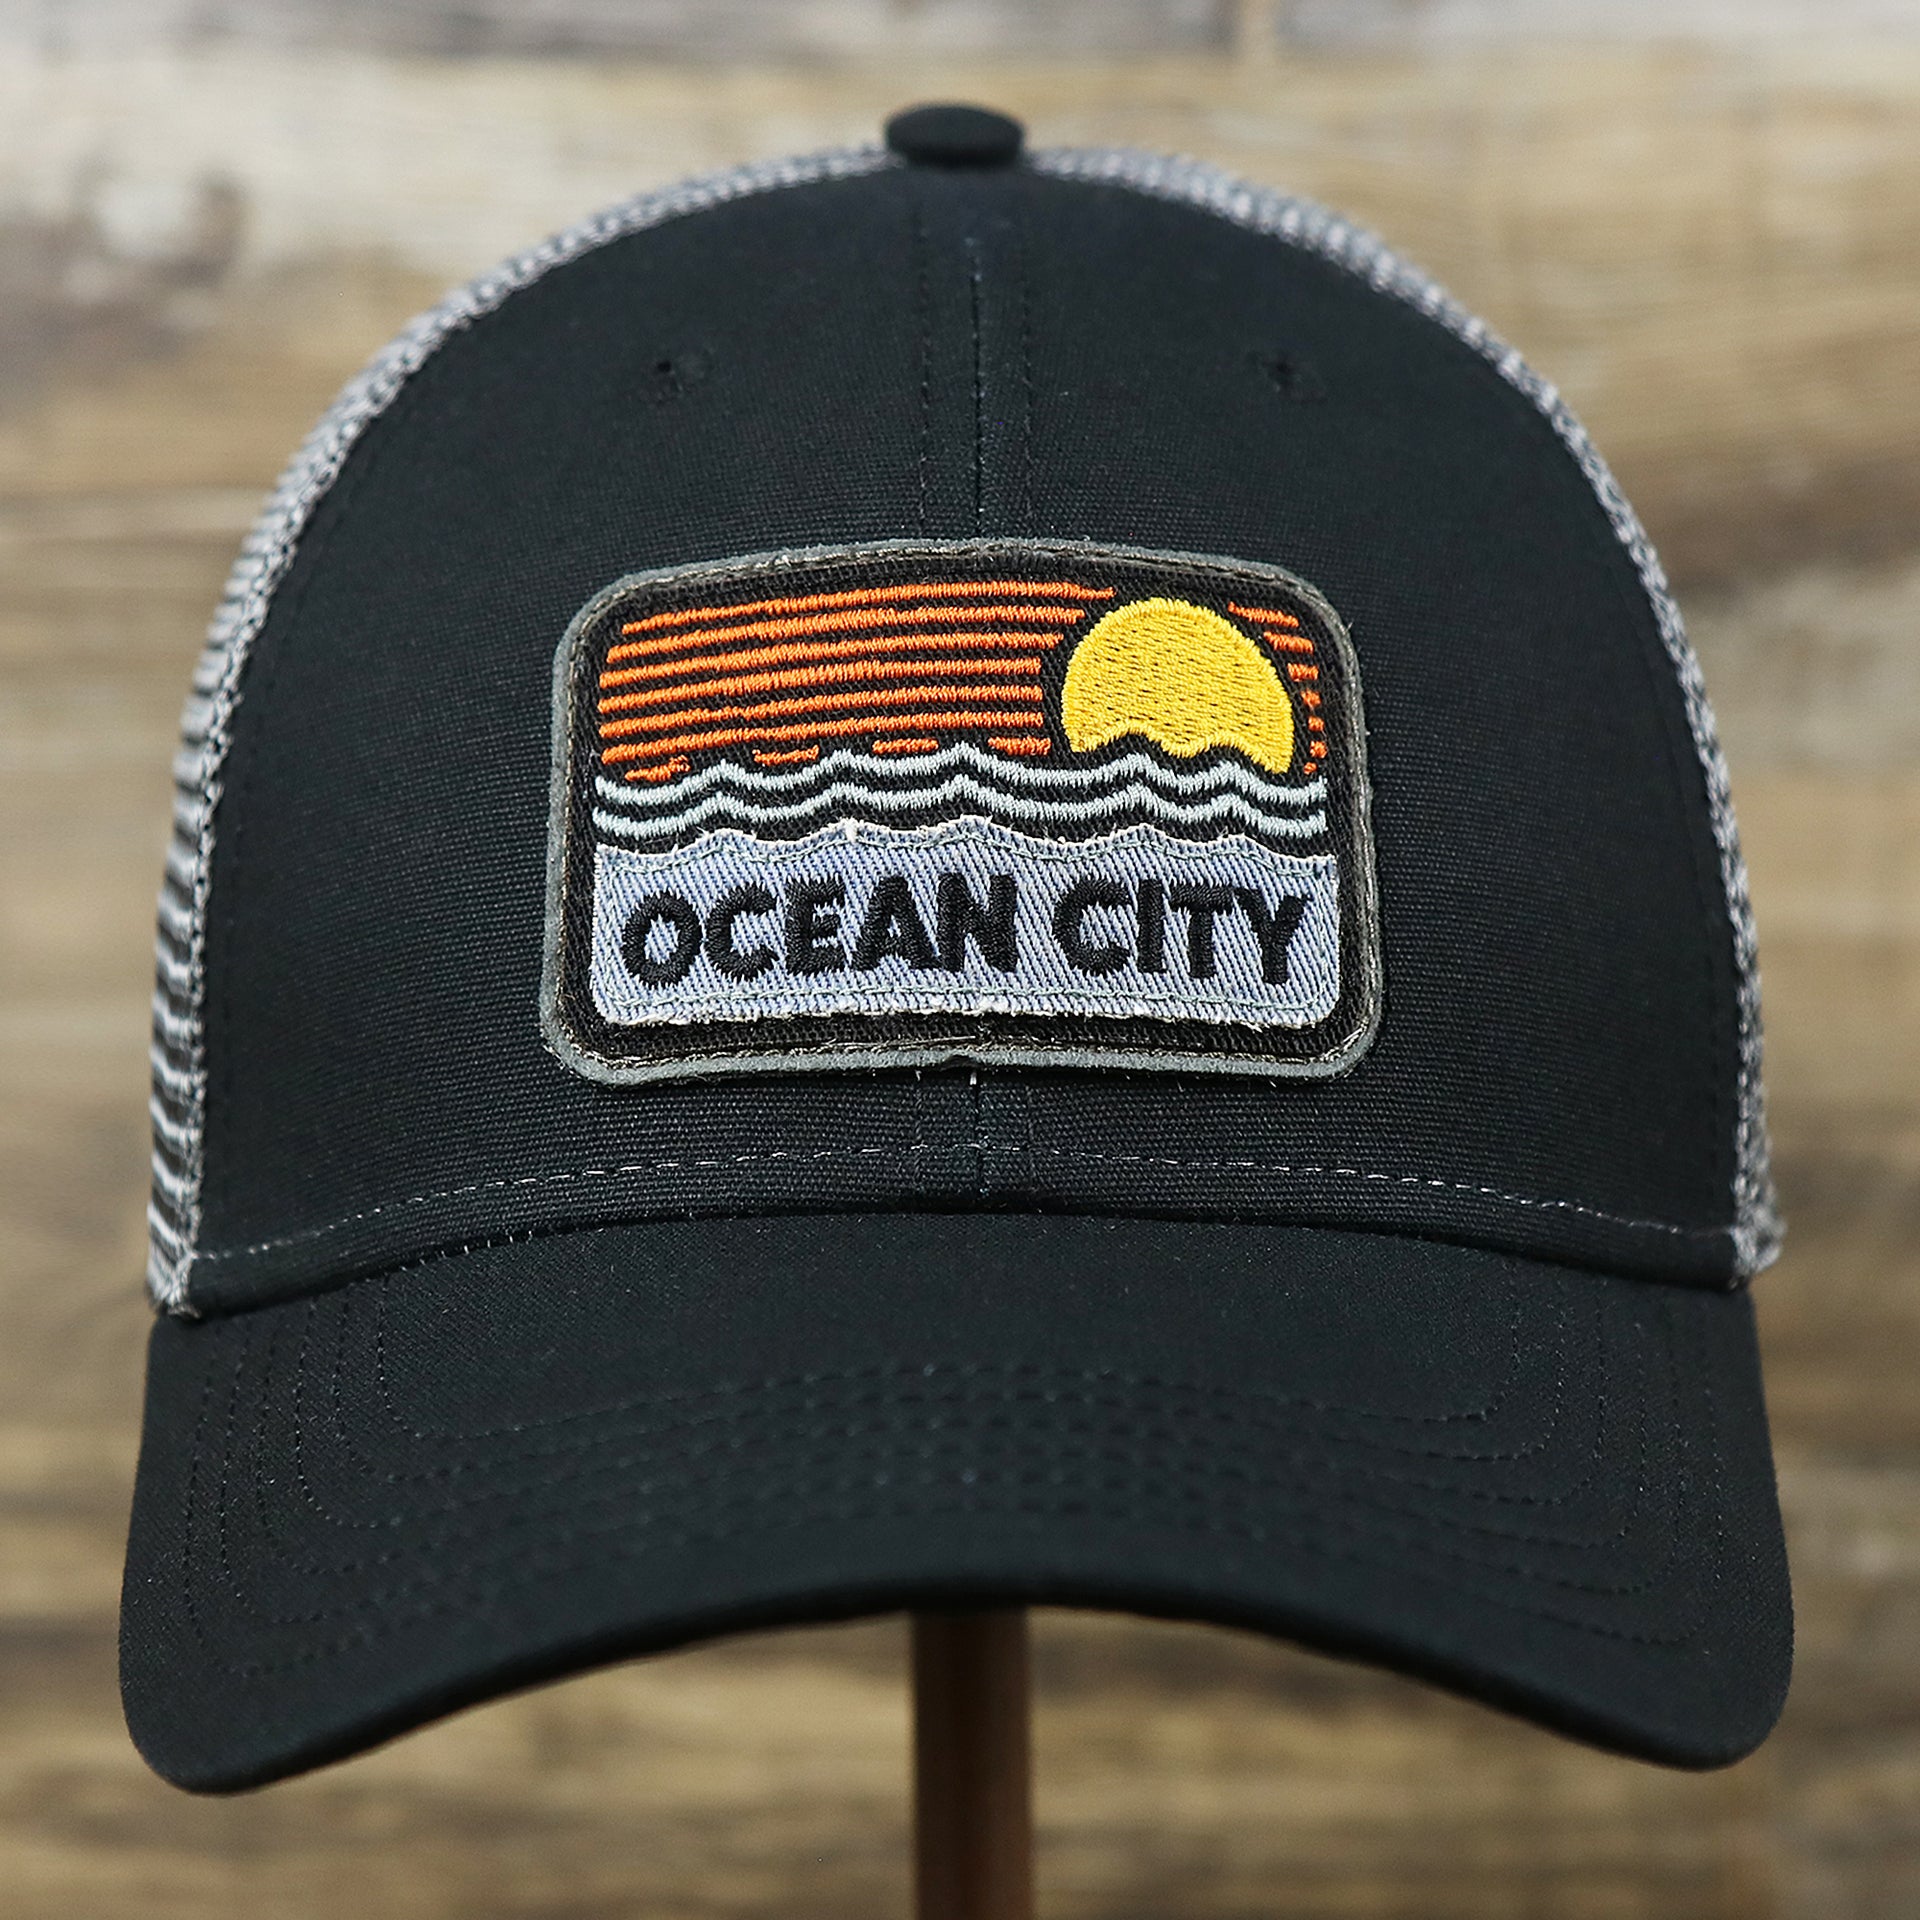 The front of the Youth New Jersey Ocean City Sunset Mesh Back Trucker Hat | Tahiti Blue And Grey Mesh Trucker Hat